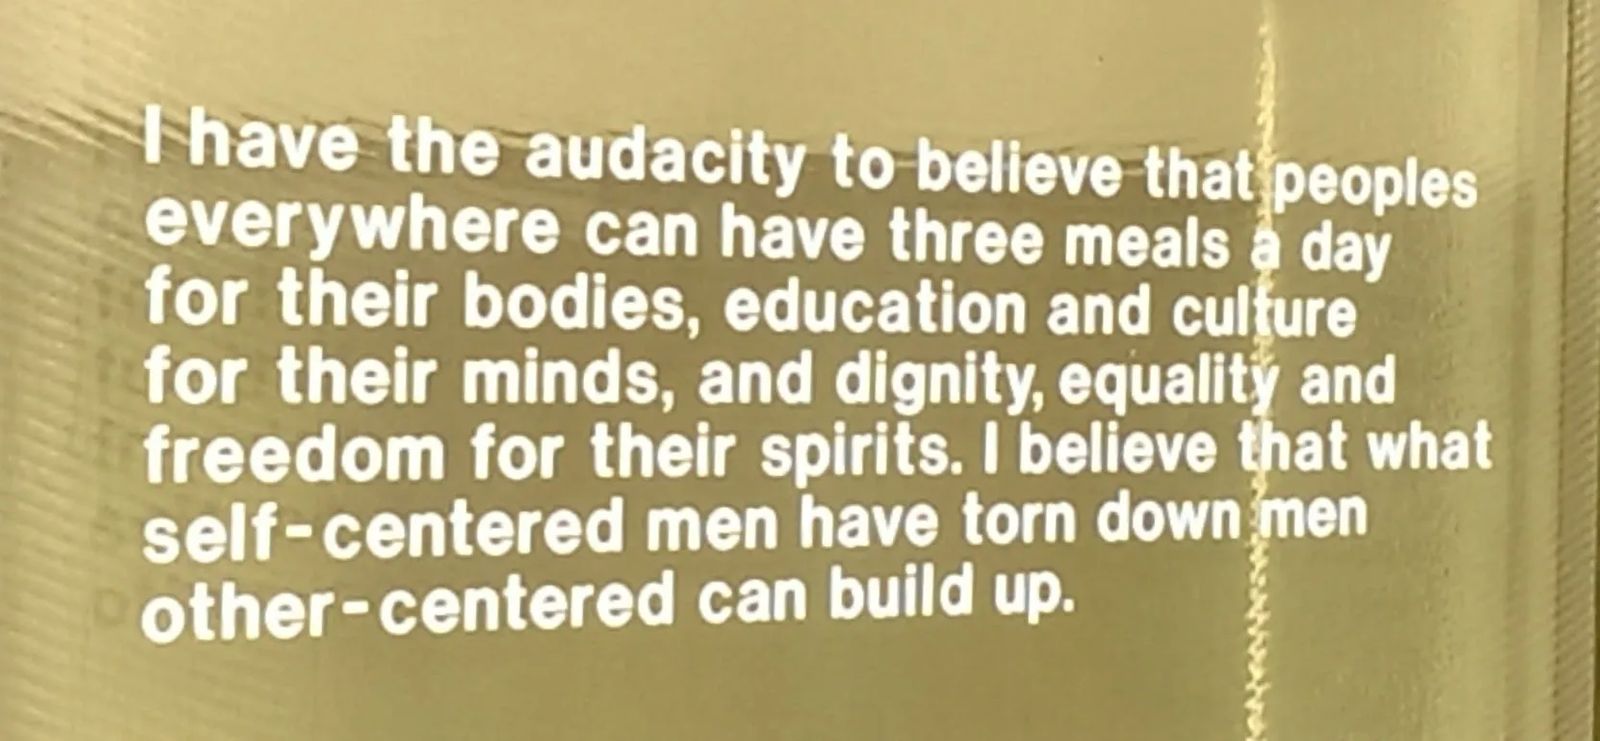 Photo of quote by Martin Luther King, Jr. in San Francisco, California